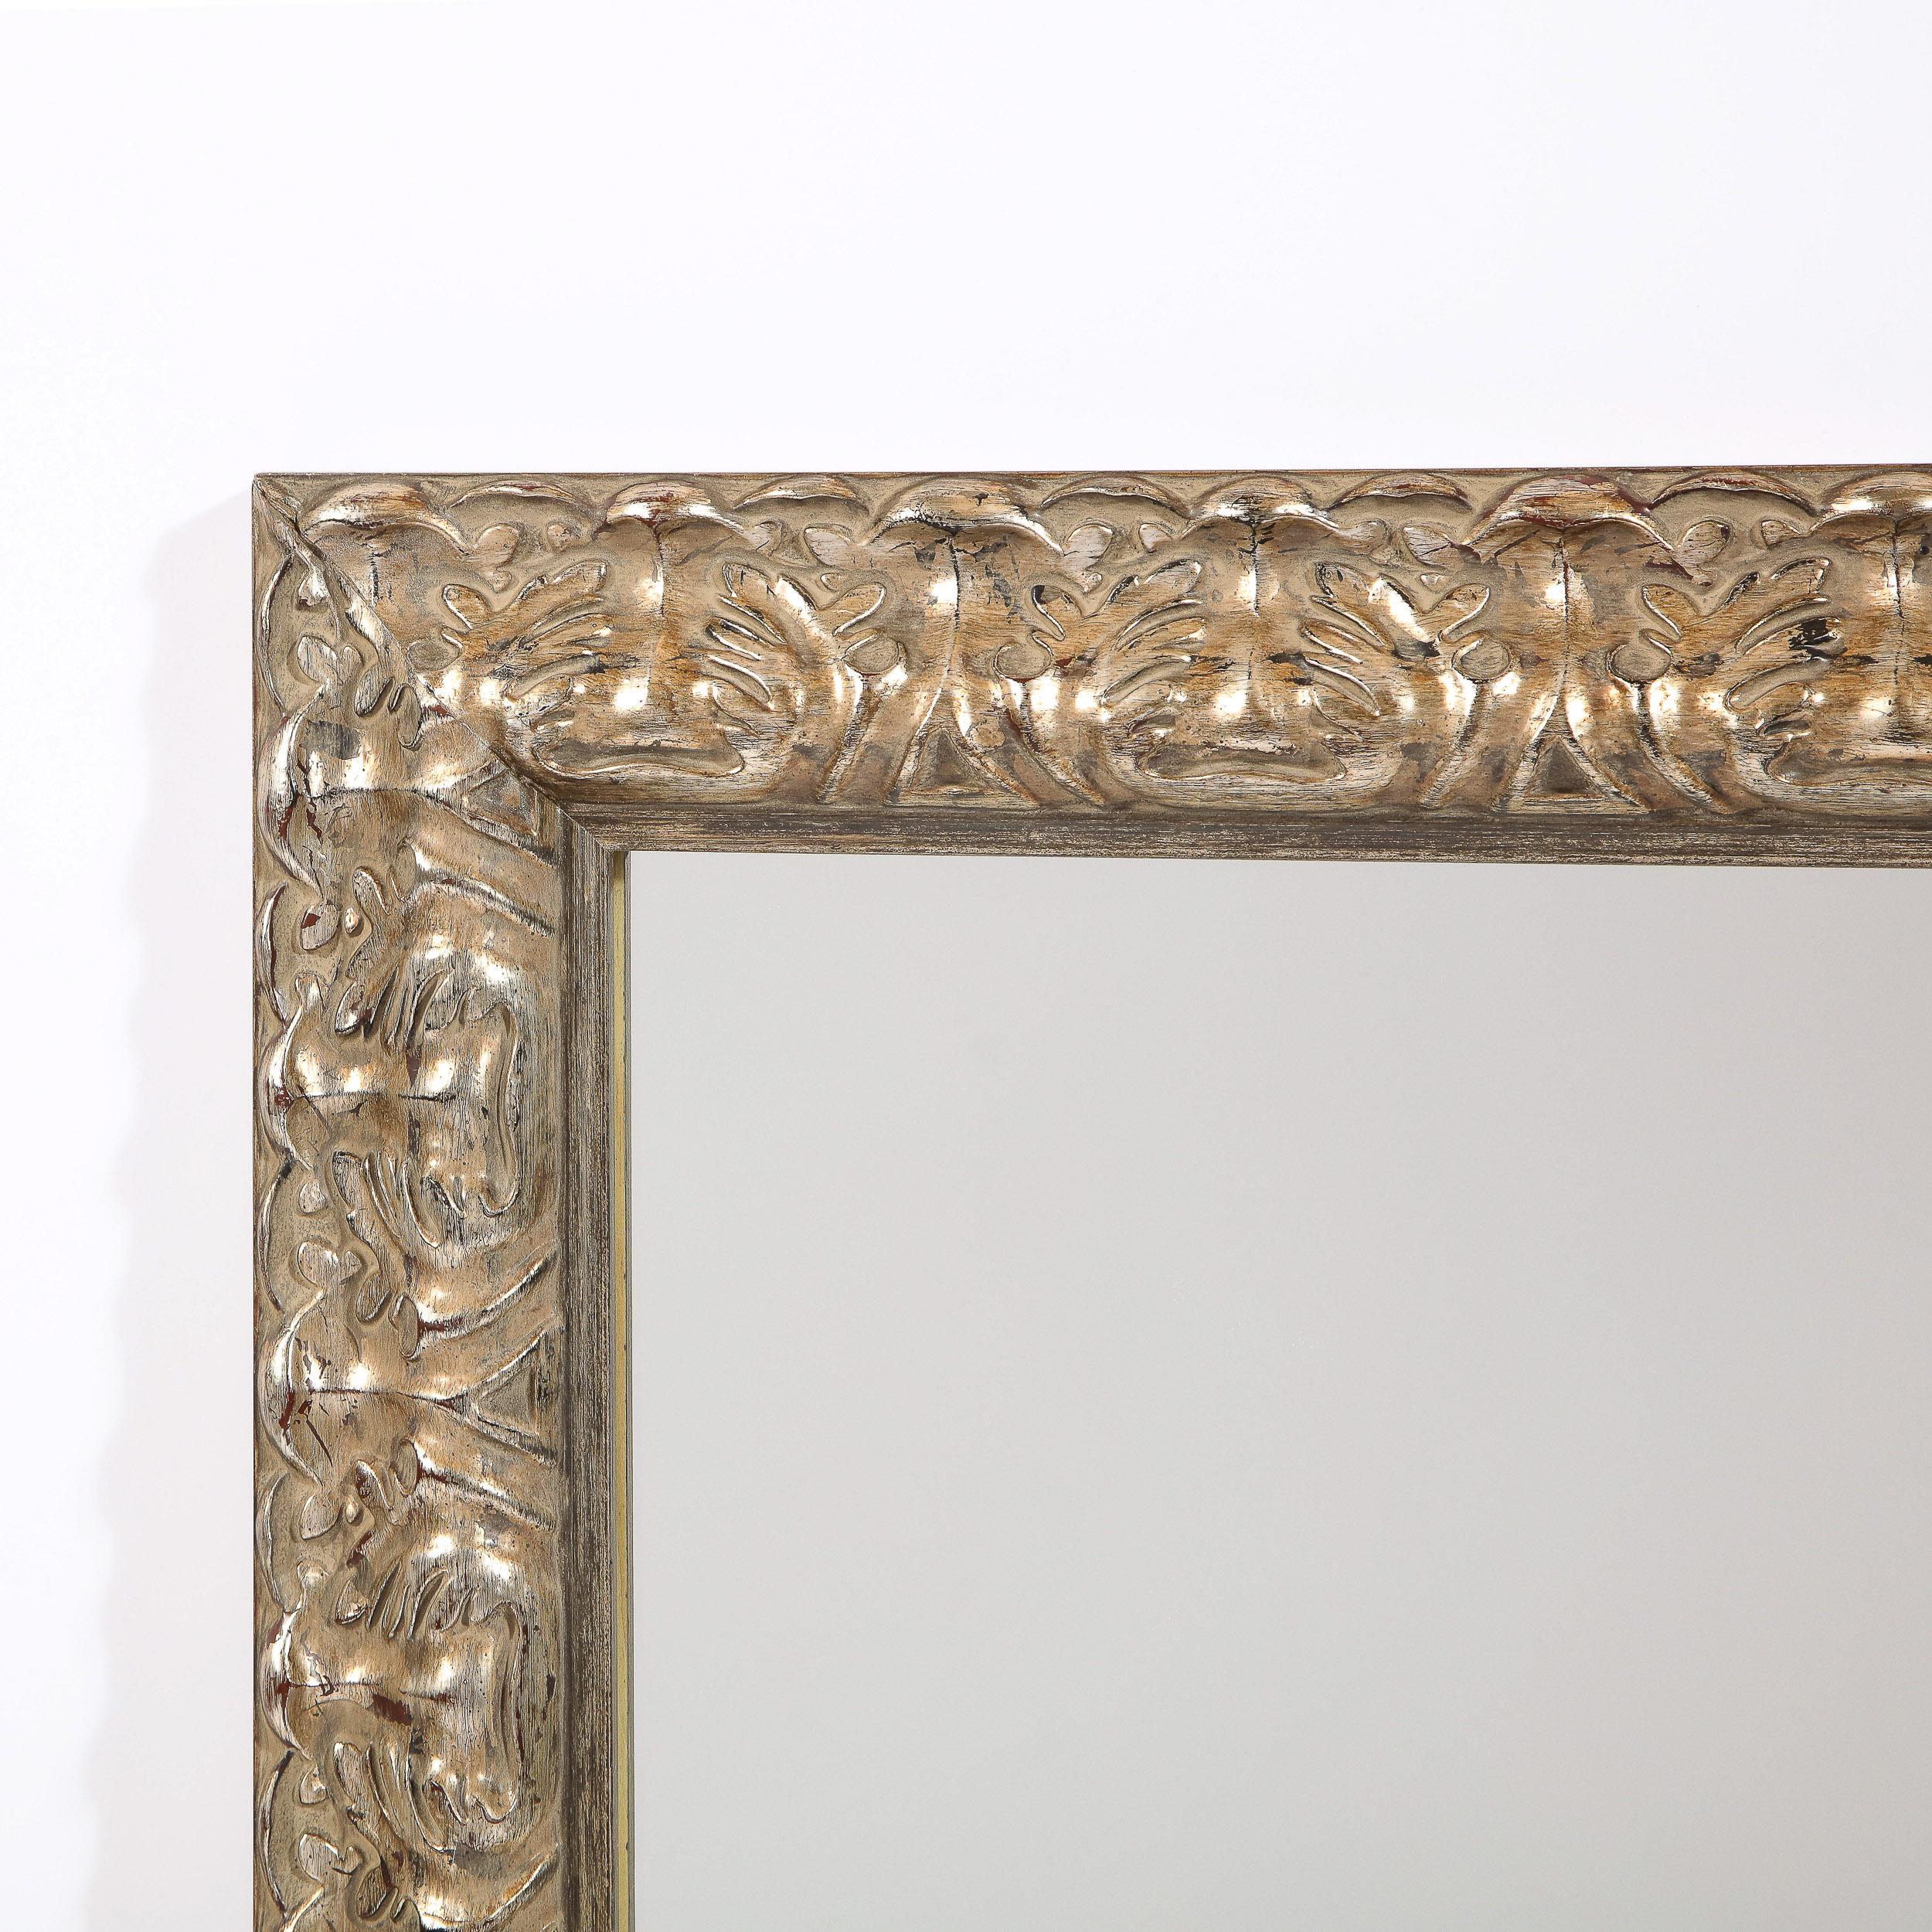 Modernist Stylized Carved Foliate Giltwood Rectangular Mirror In Excellent Condition For Sale In New York, NY